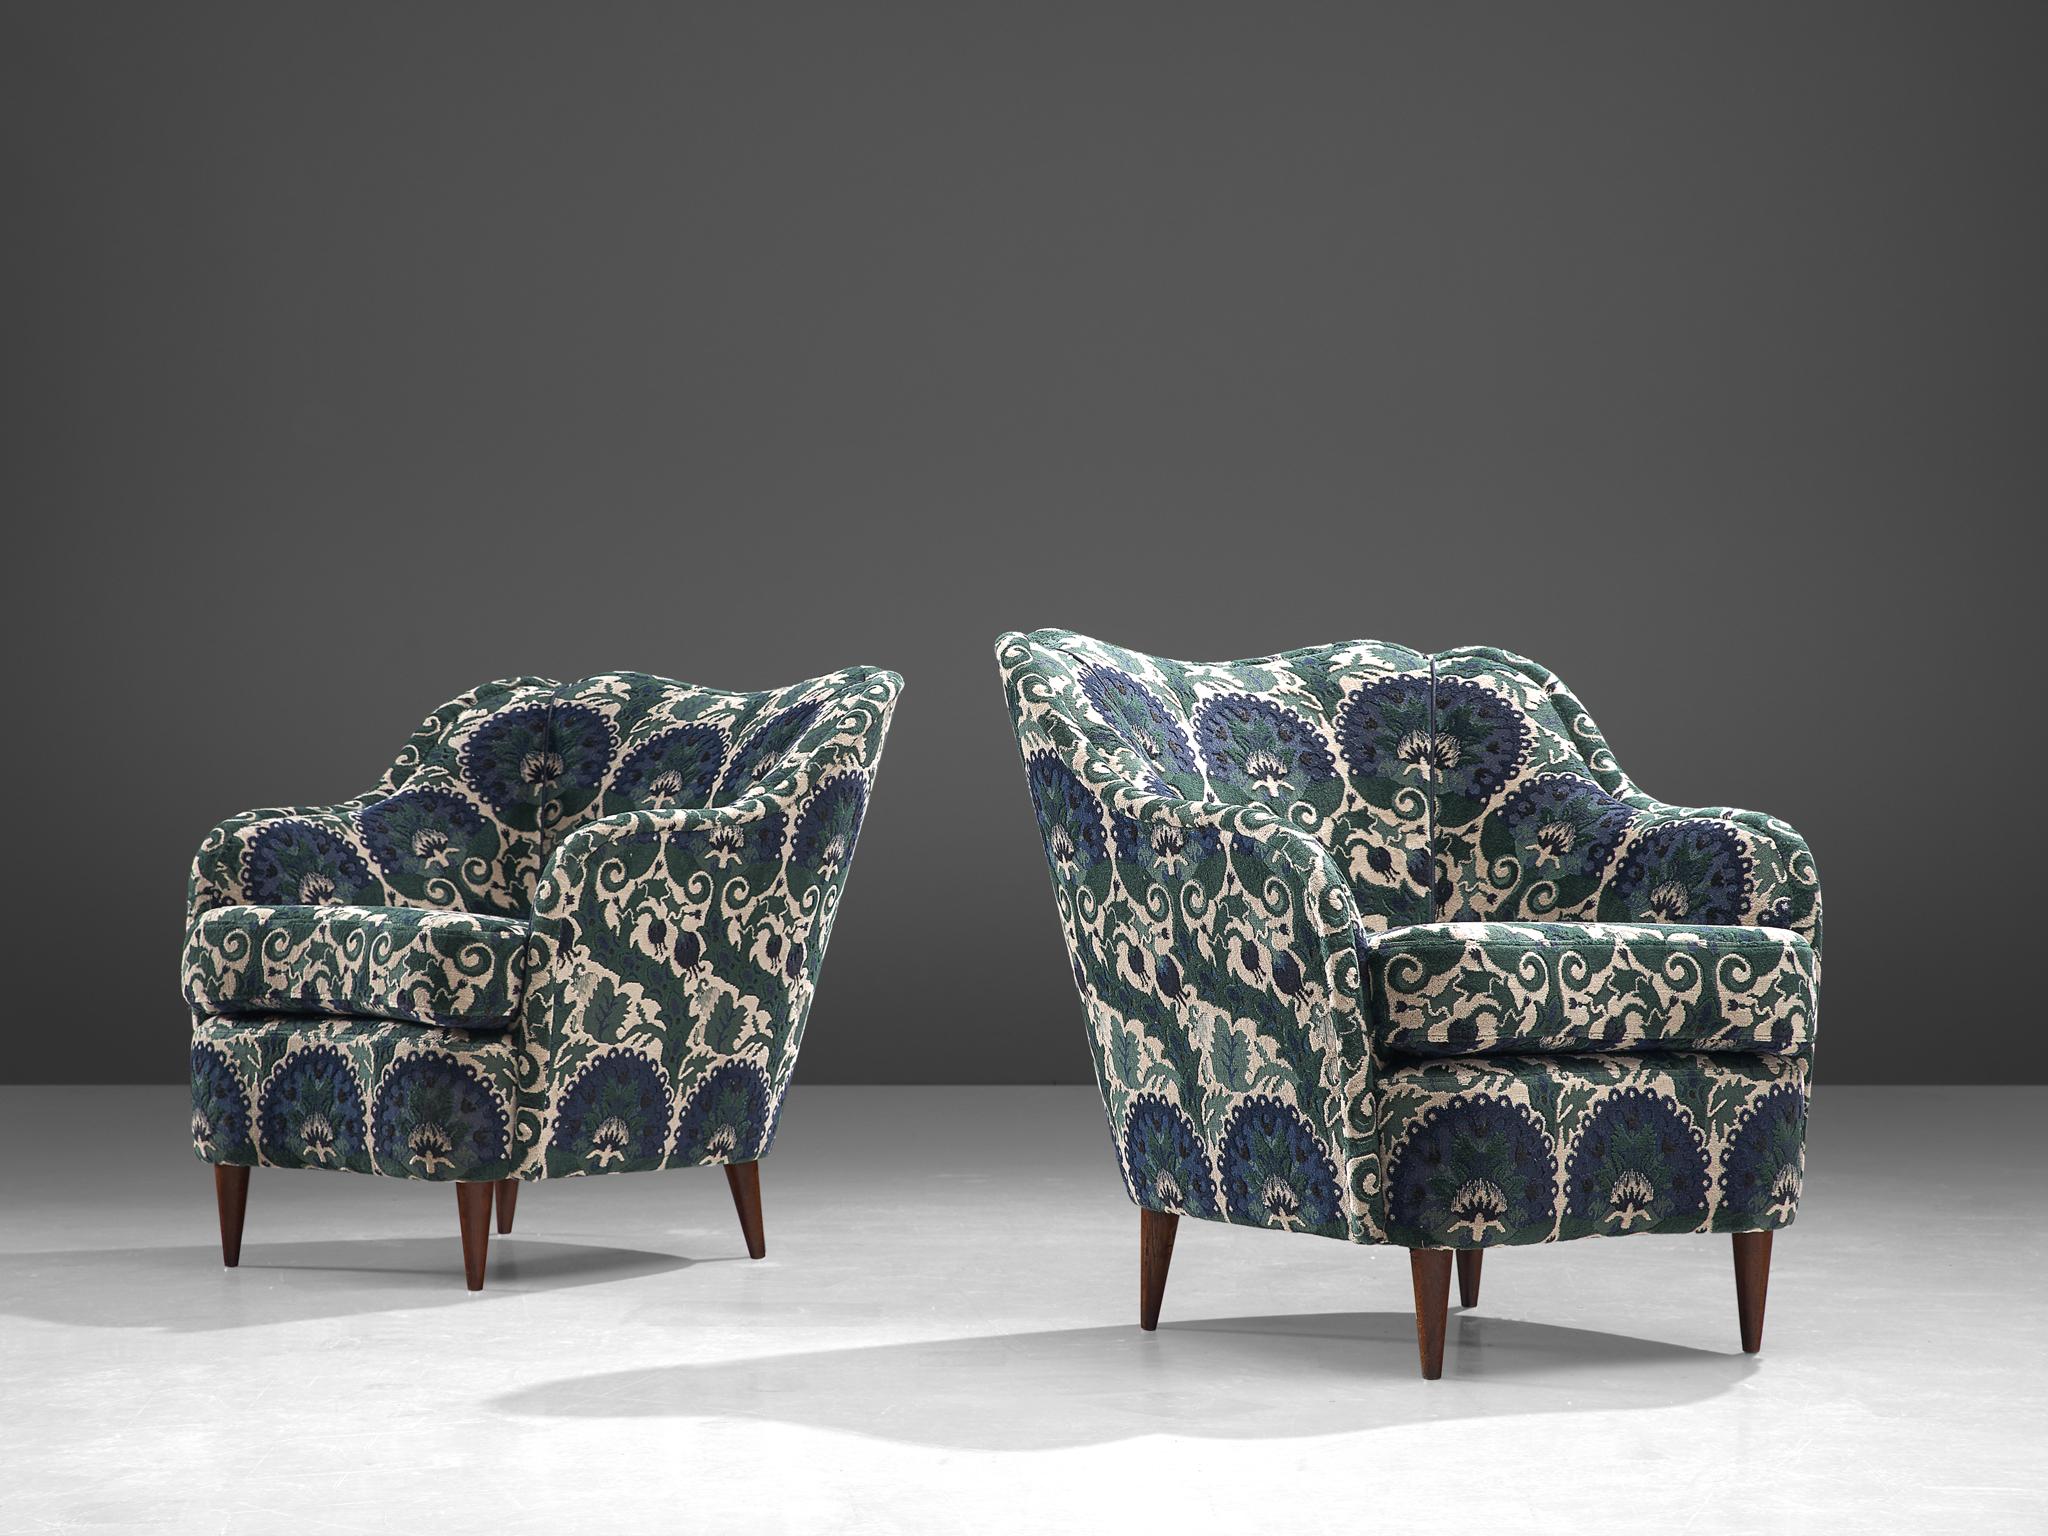 Italian Pair of Lounge Chairs in ZAK+FOX ‘Fantasma’ Collection 2020 Upholstery